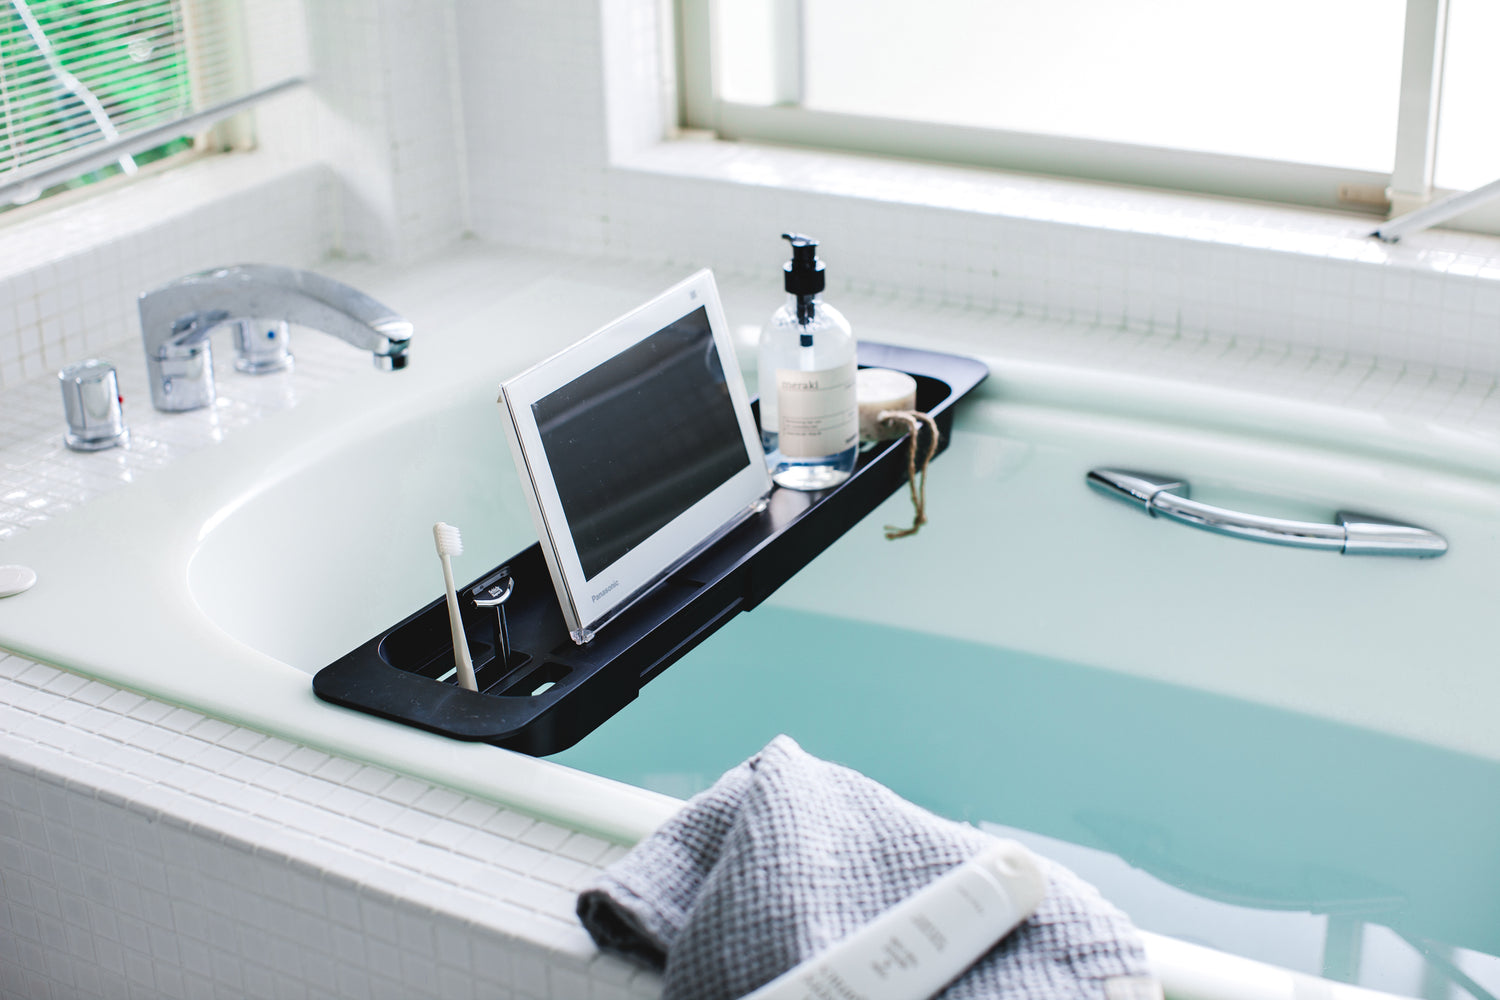 View 8 - Side view of black Expandable Bathtub Caddy holding cleaning items and tablet in bathroom by Yamazaki Home.